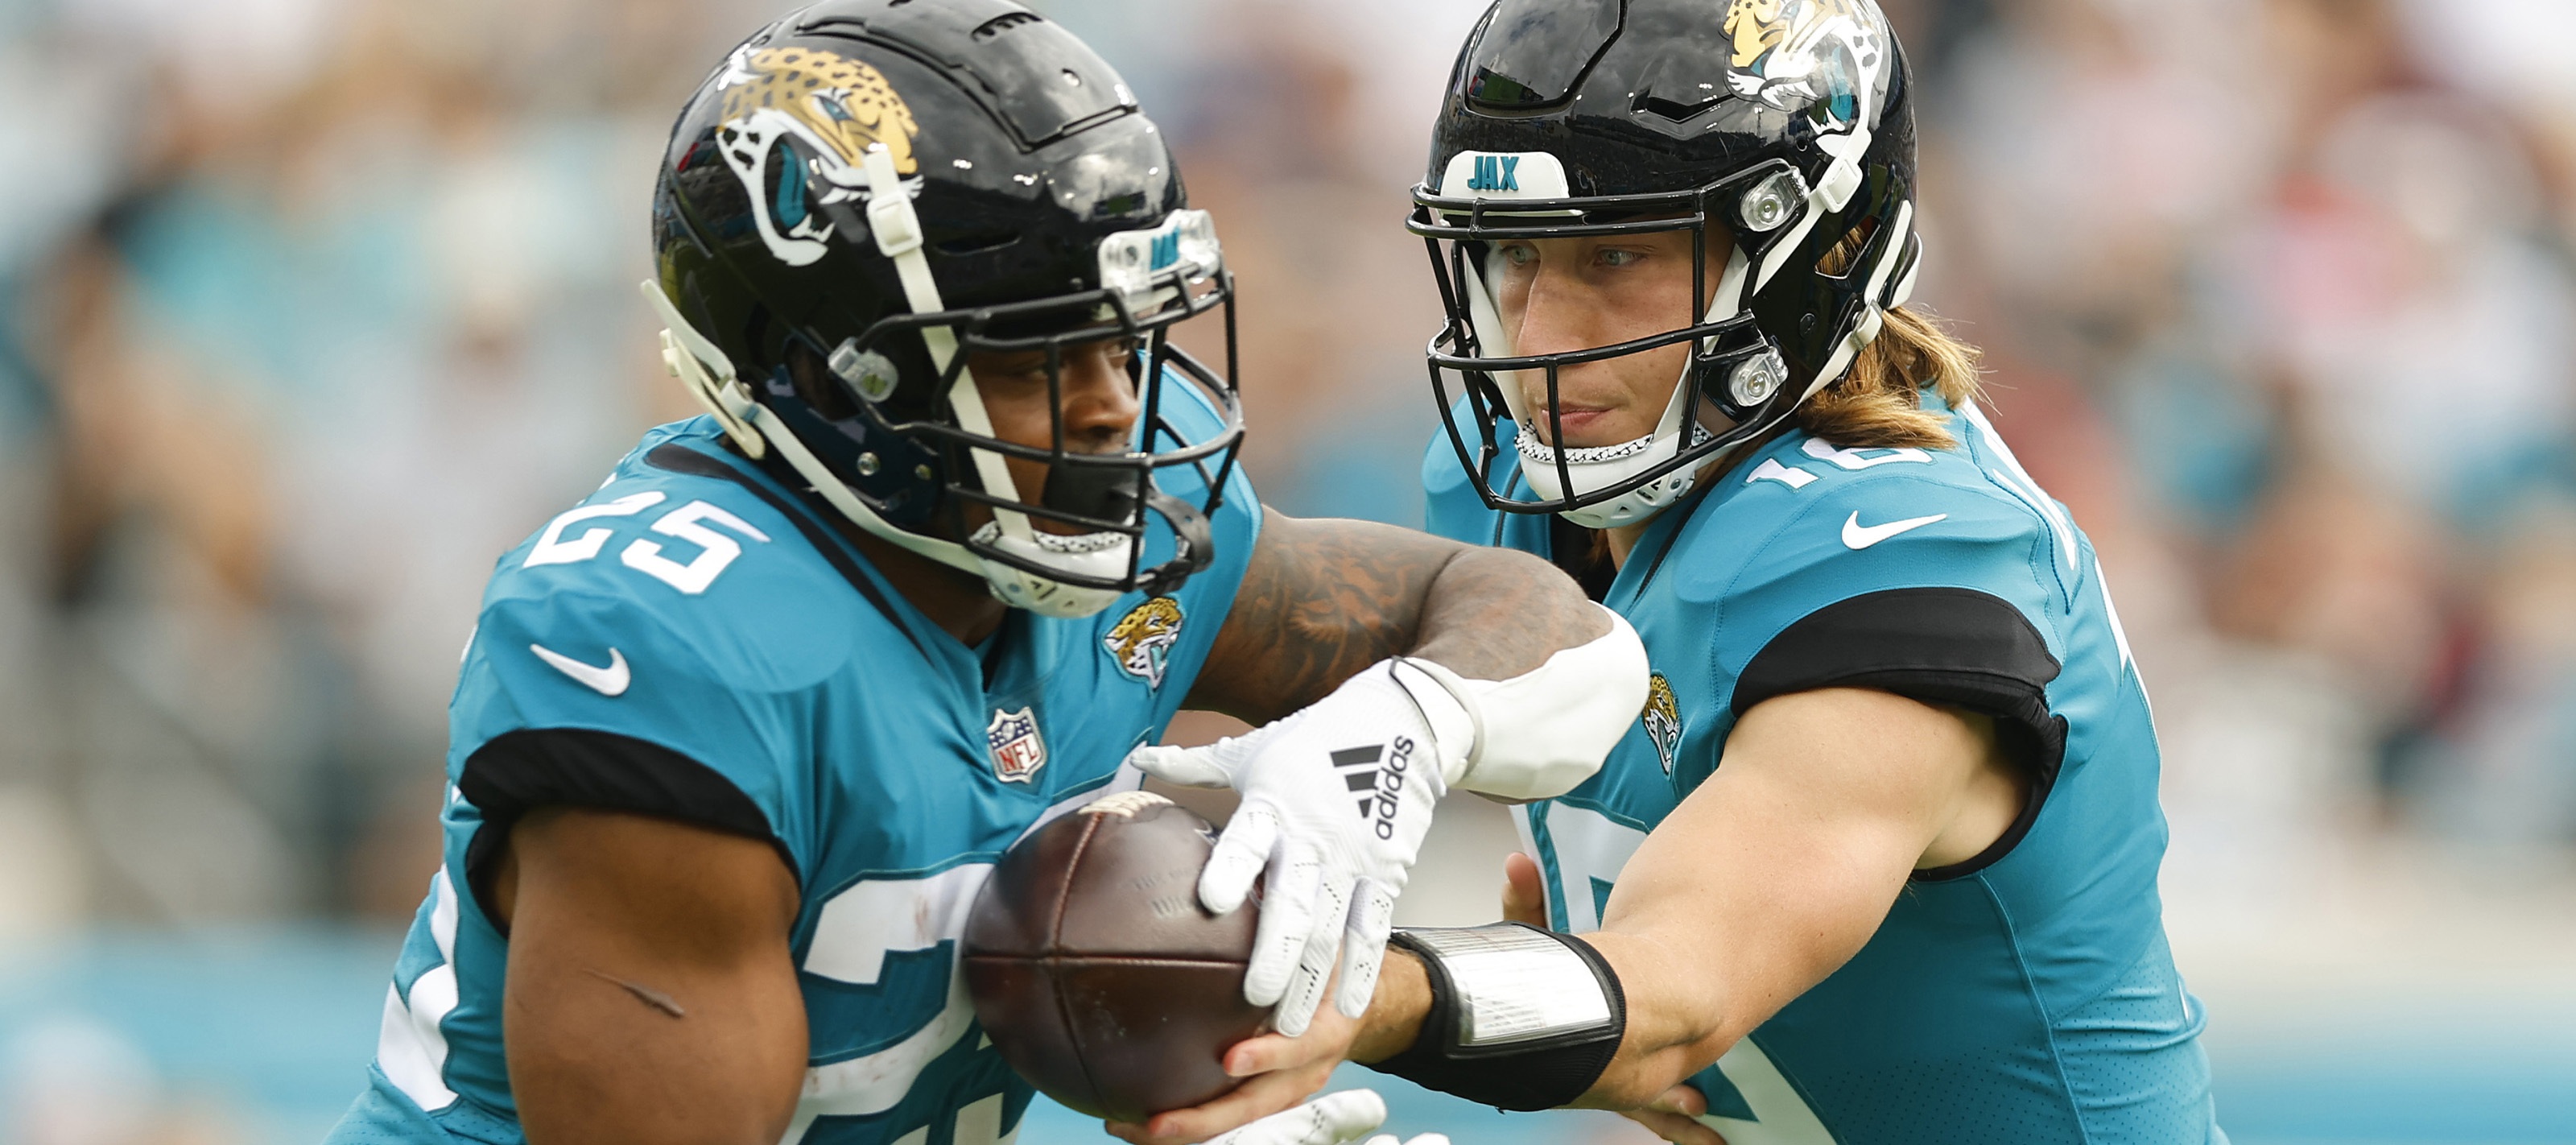 2022 NFL Betting Prediction On Whether or Not Will the Jaguars Improve their Record This Season